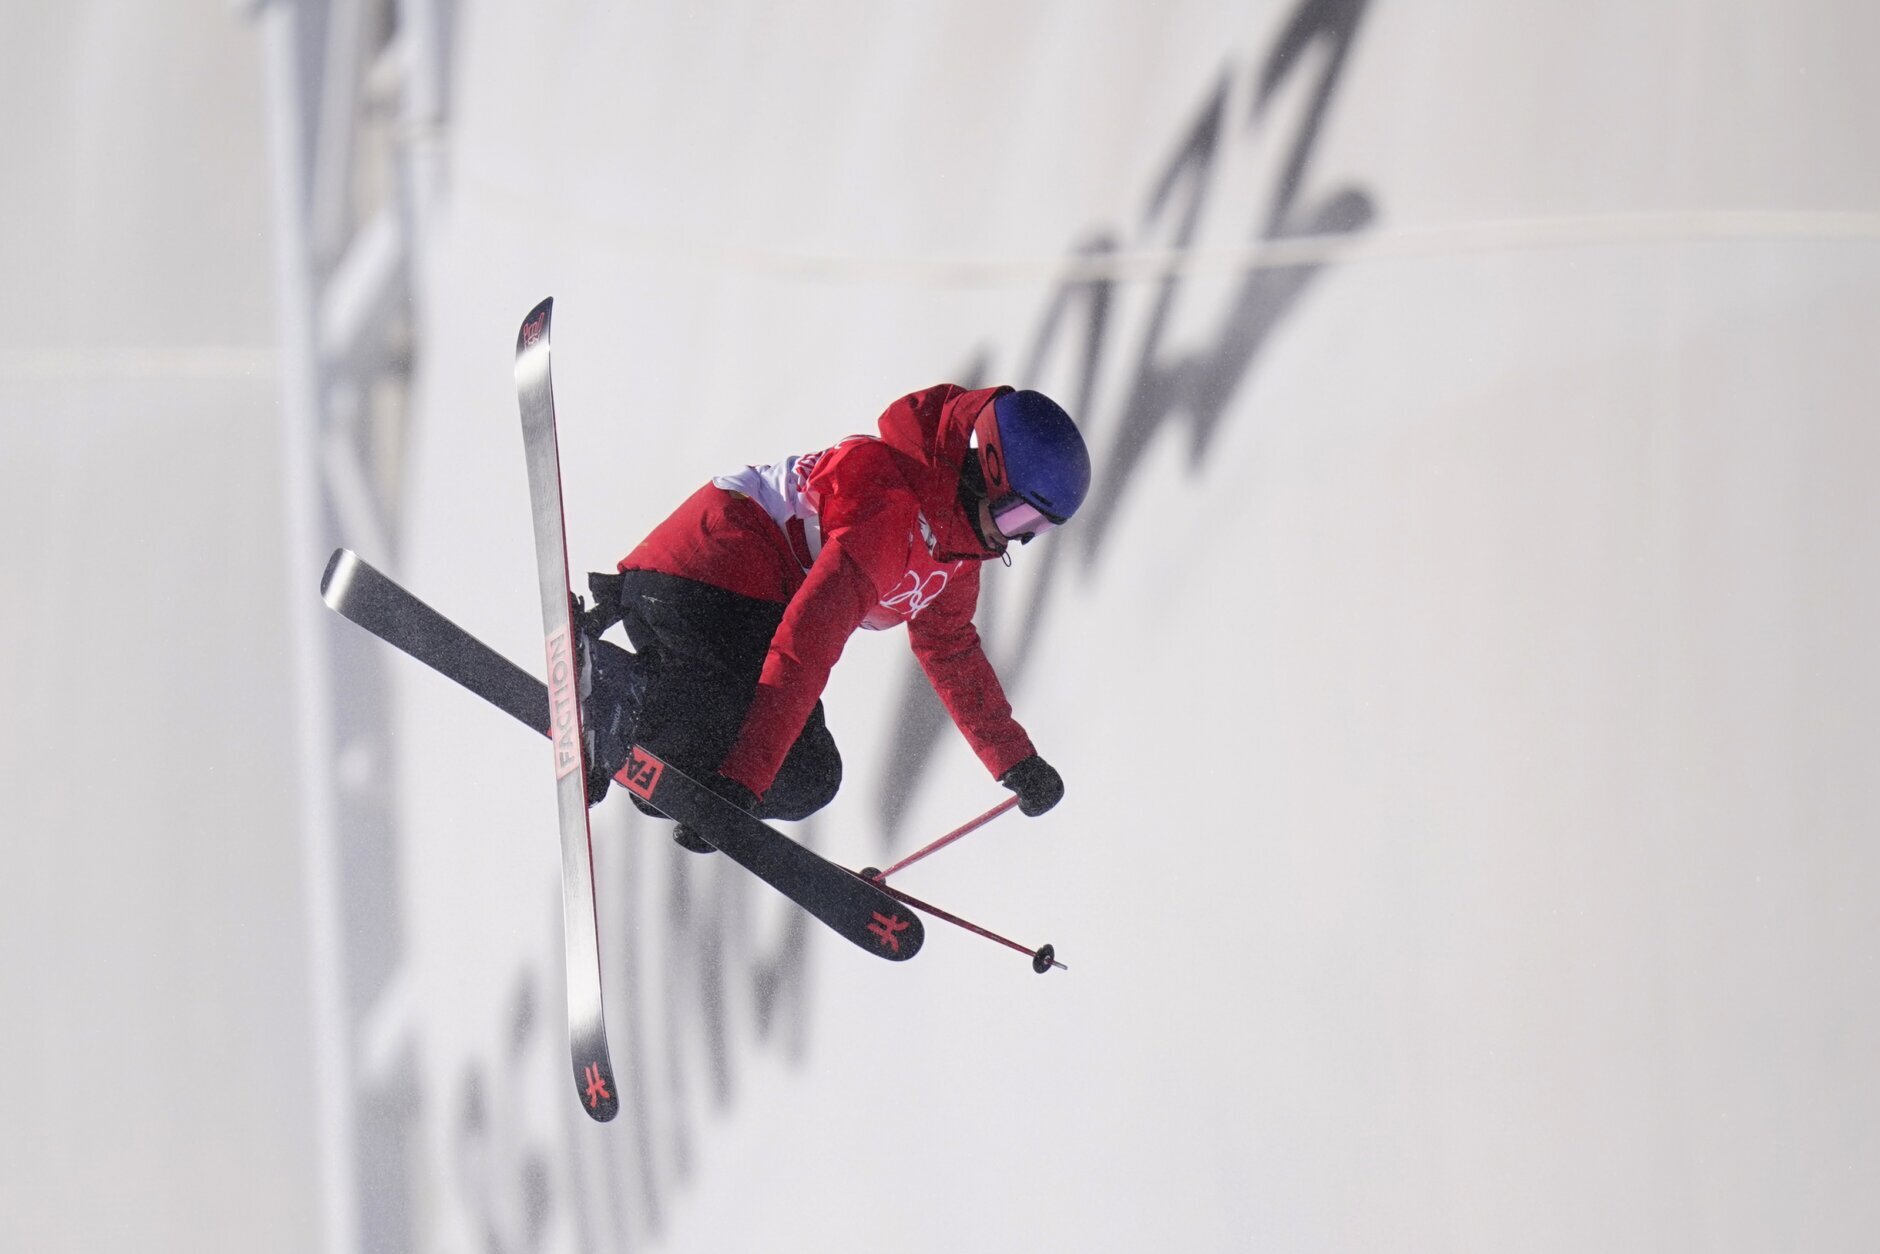 Skiing for joy, Gu wins 3rd Olympic medal — a halfpipe gold - WTOP 